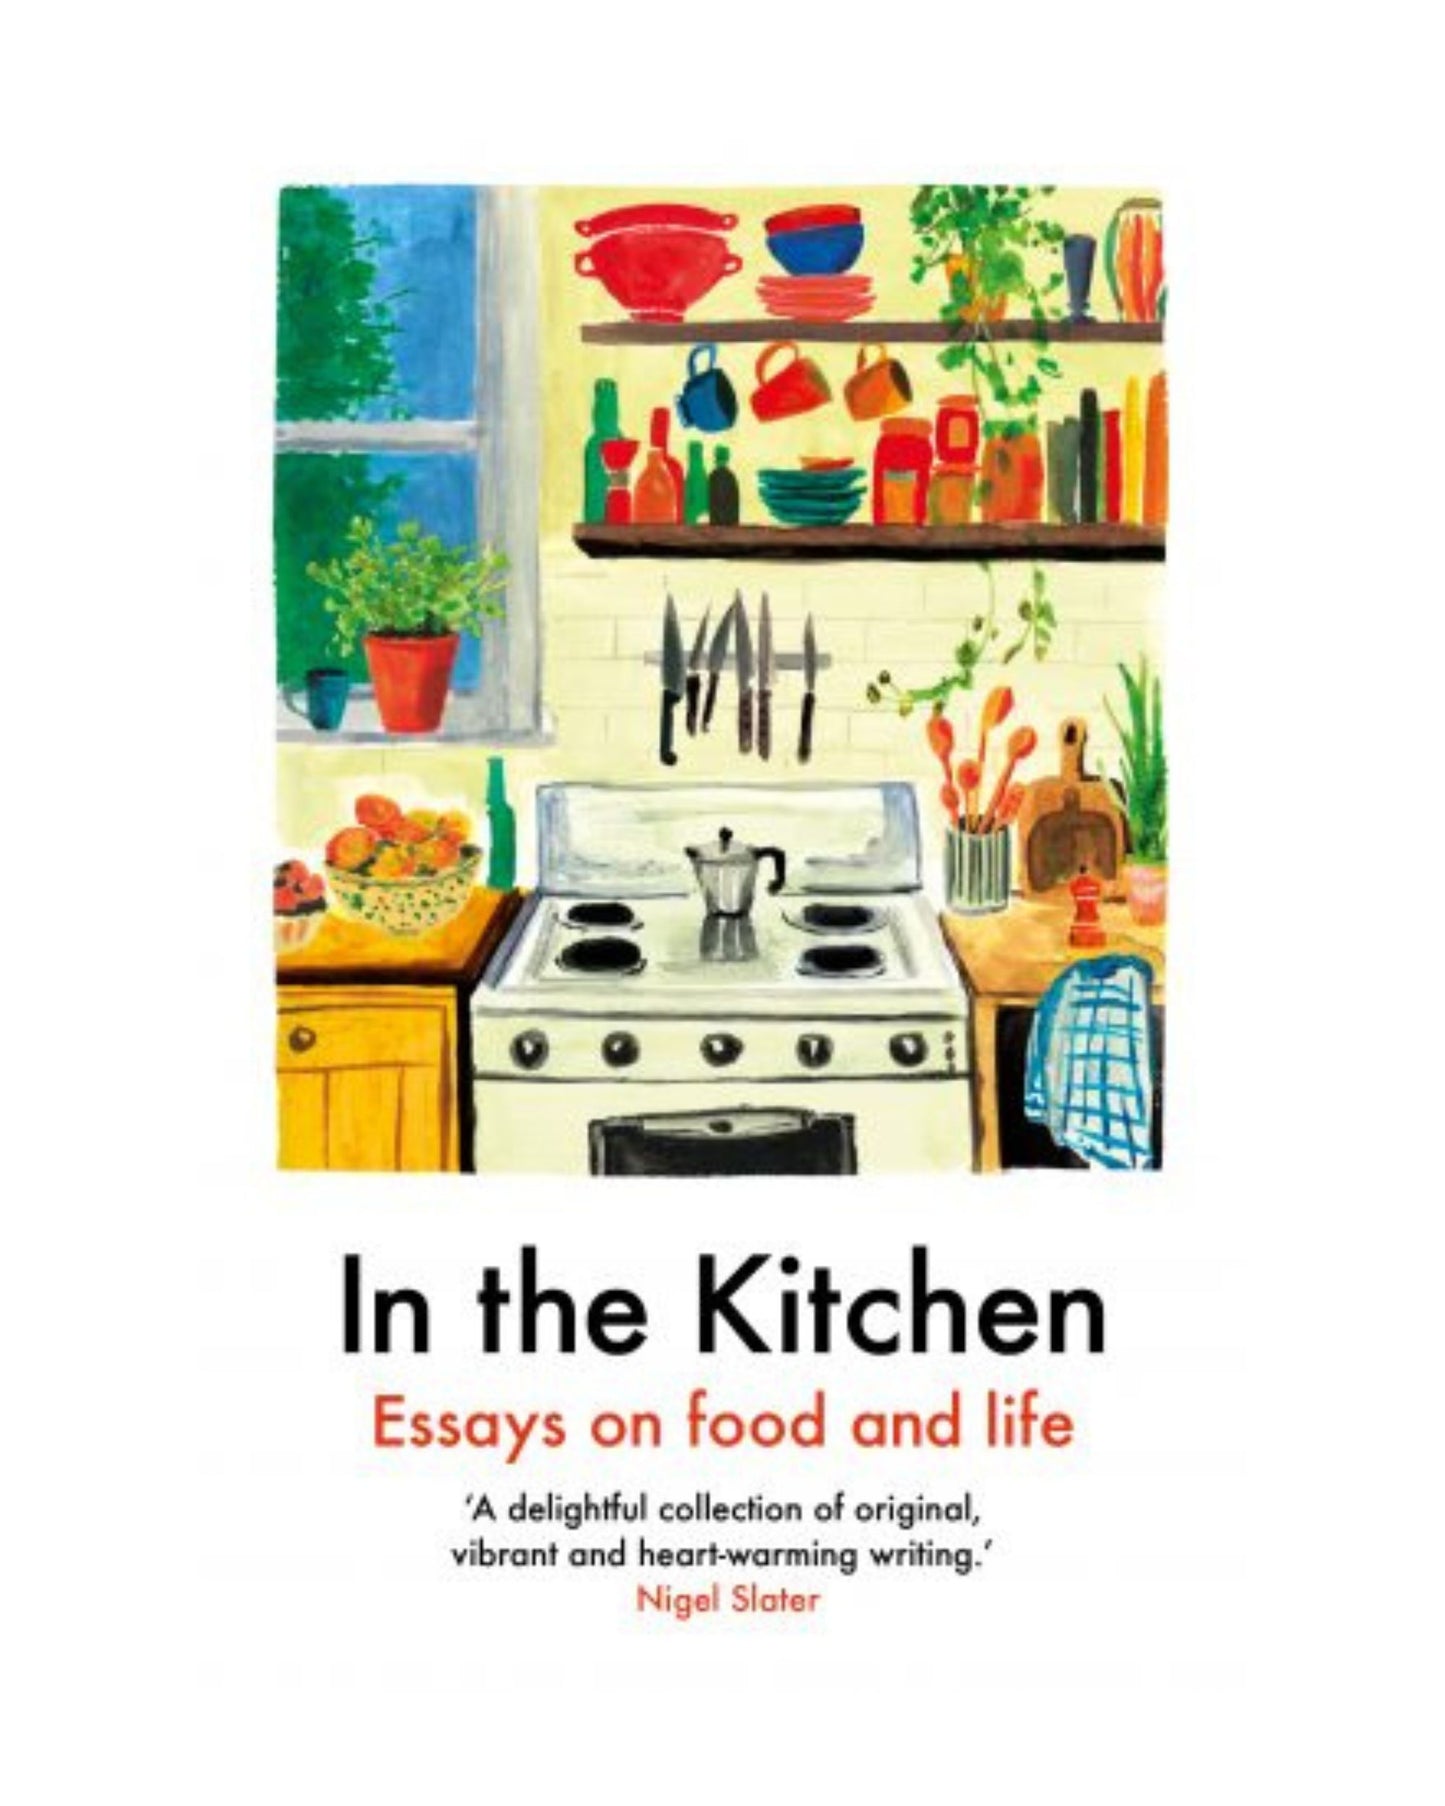 In the Kitchen: Essays on Food & Life